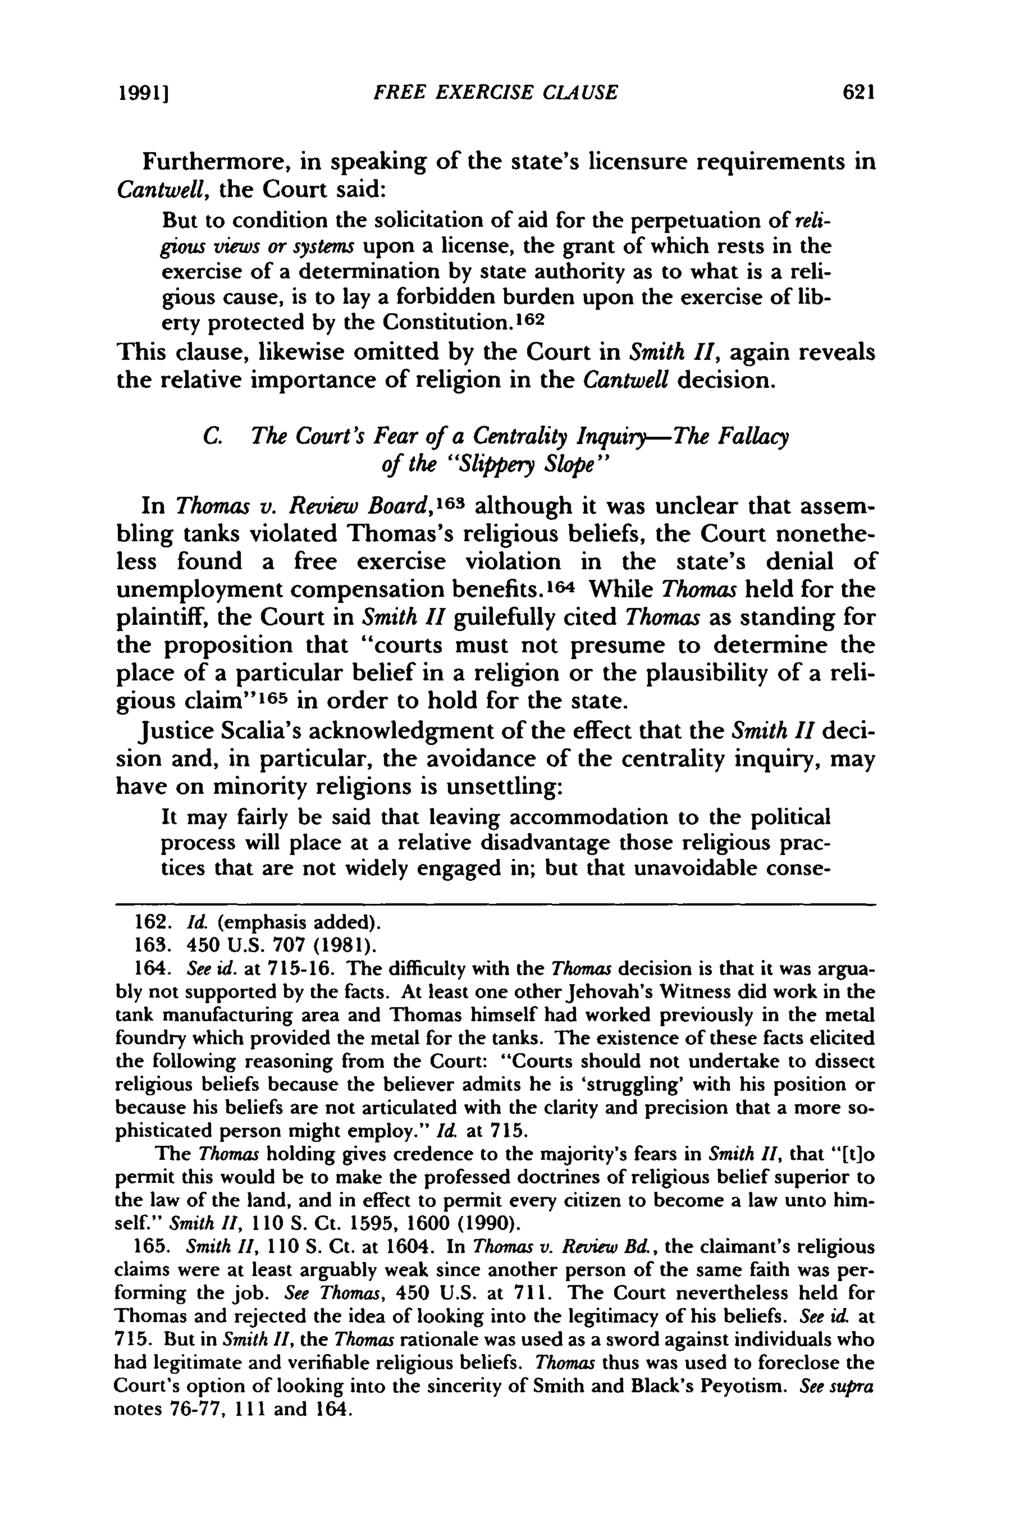 1991] Butler: Constitutional Law The Free Exercise Clause: The Supreme Court Av FREE EXERCISE CLAUSE Furthermore, in speaking of the state's licensure requirements in Cantwell, the Court said: But to